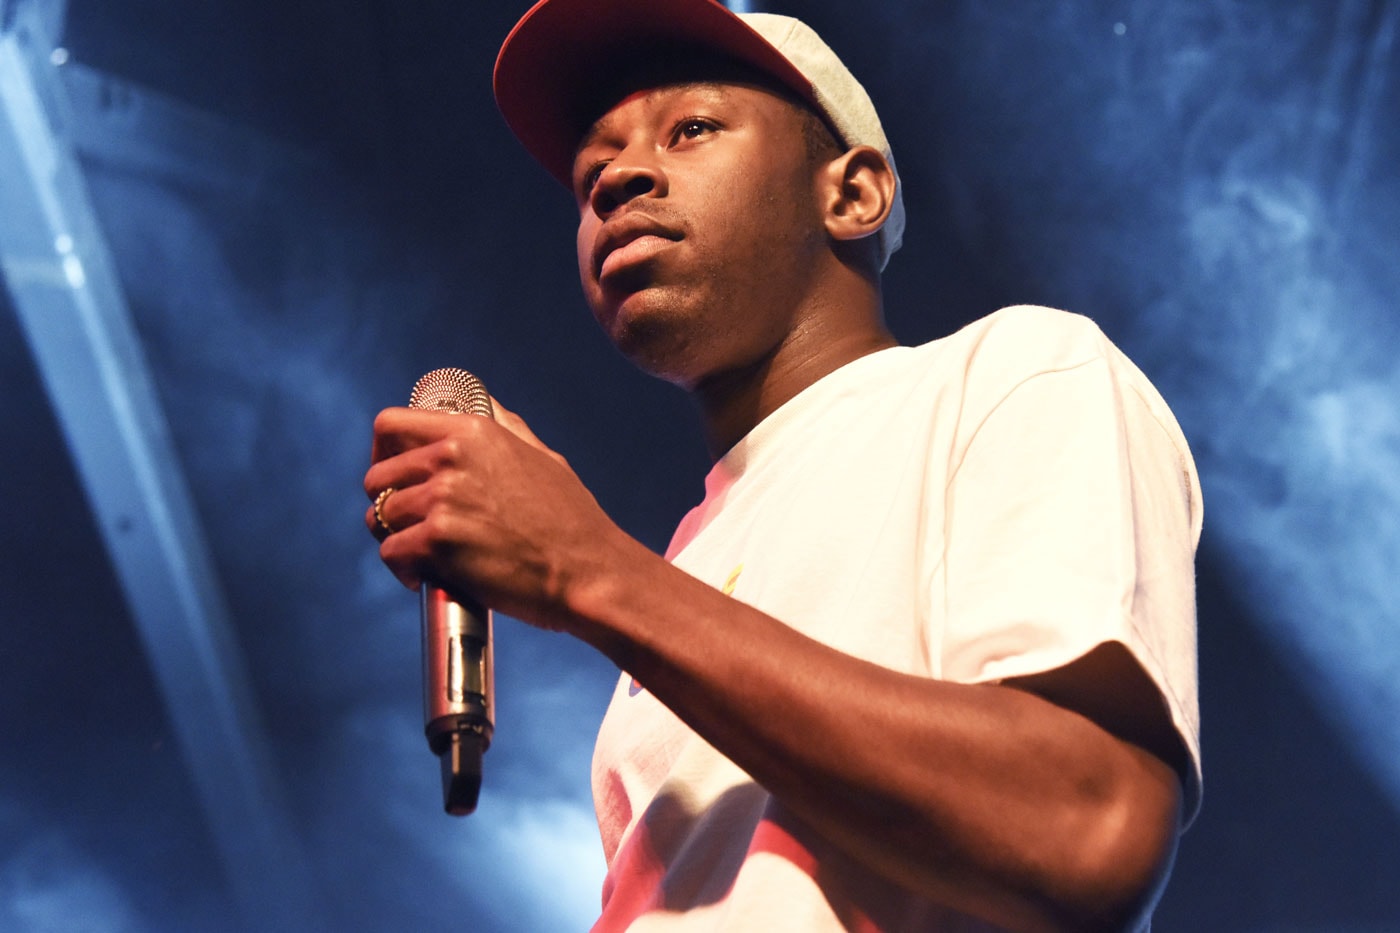 Tyler, The Creator Banned From UK for "3-5 Years"